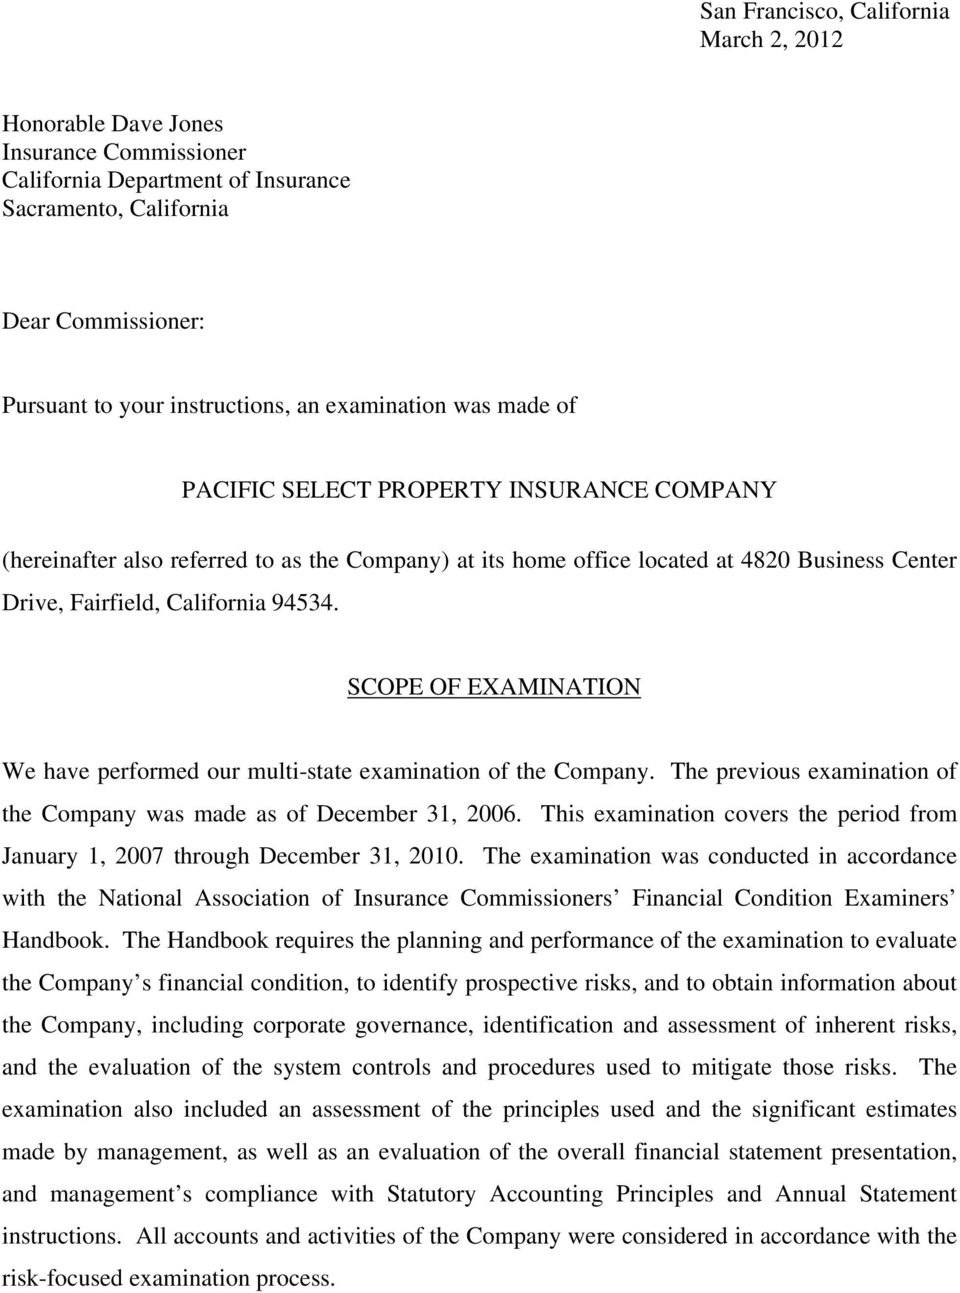 SCOPE OF EXAMINATION We have performed our multi-state examination of the Company. The previous examination of the Company was made as of December 31, 2006.